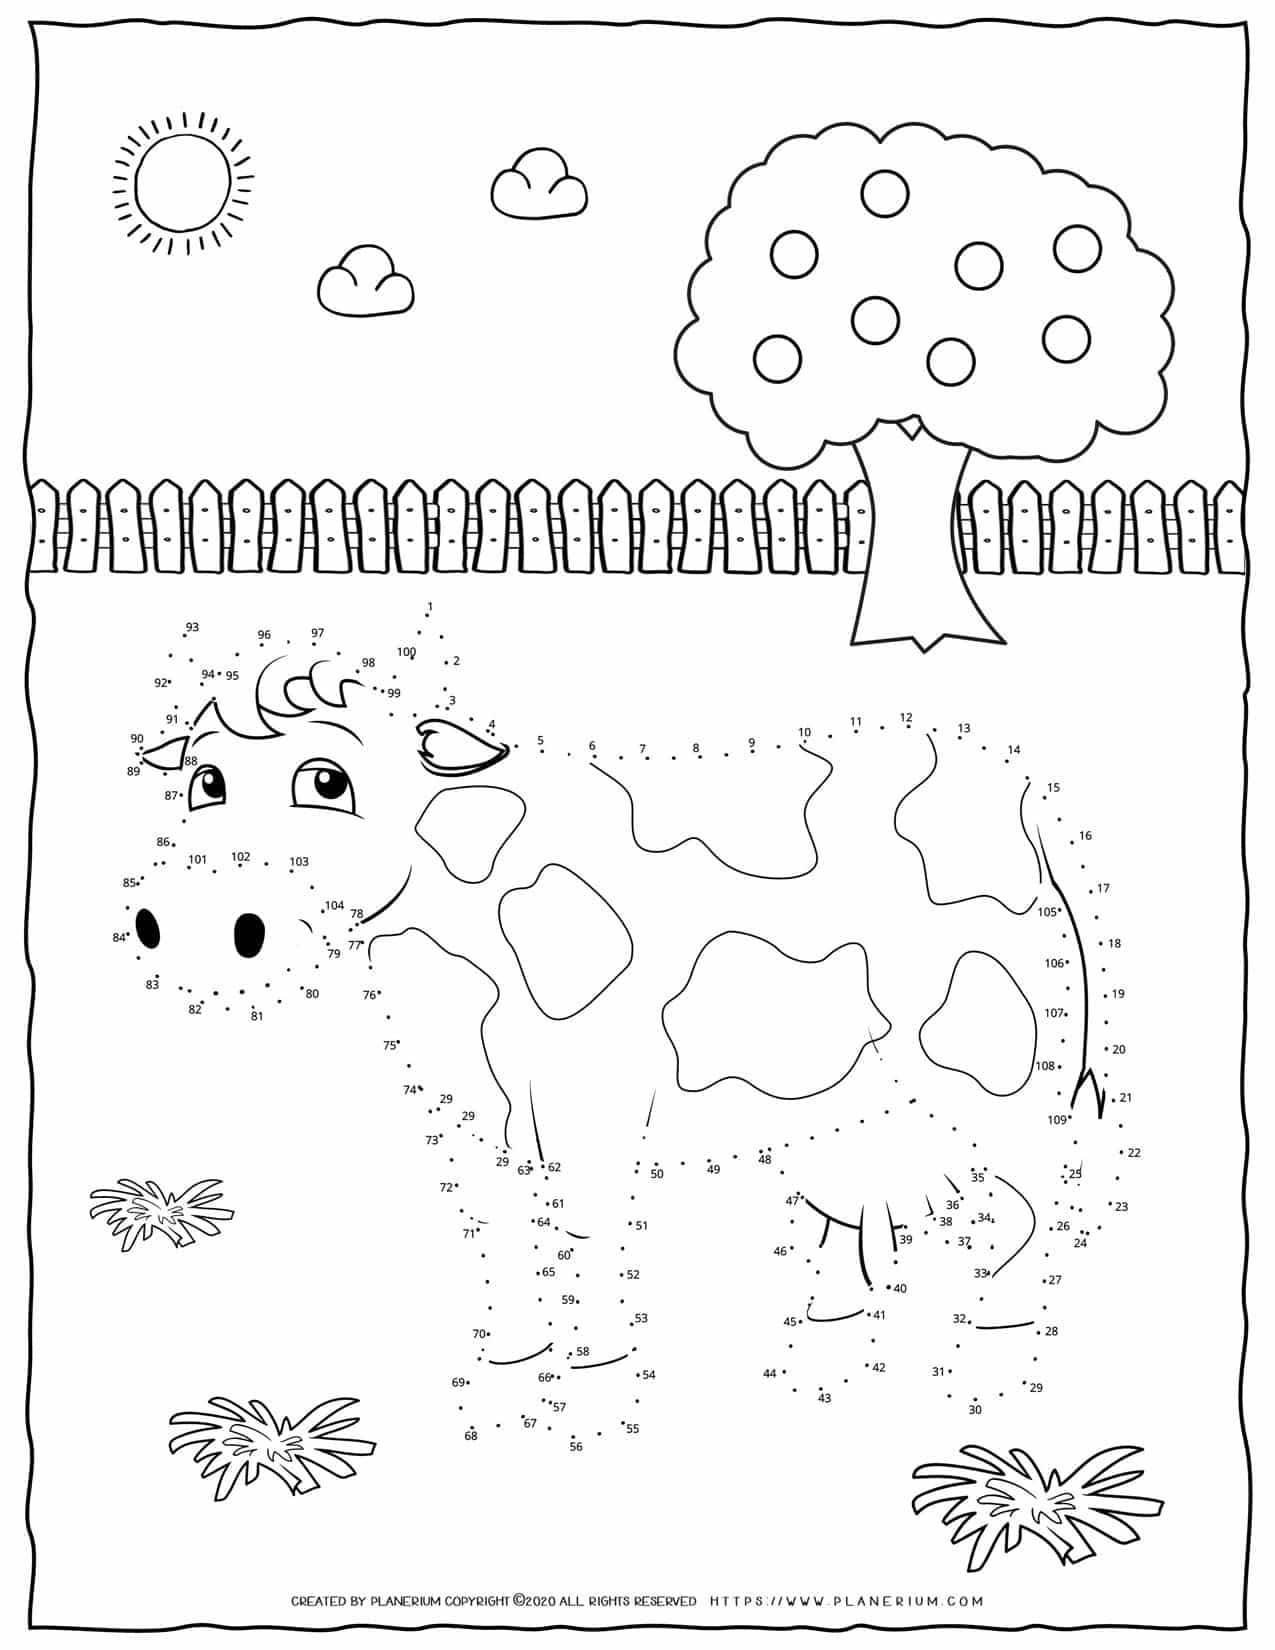 Animals Worksheet - Connect The Dots - Cow | Planerium